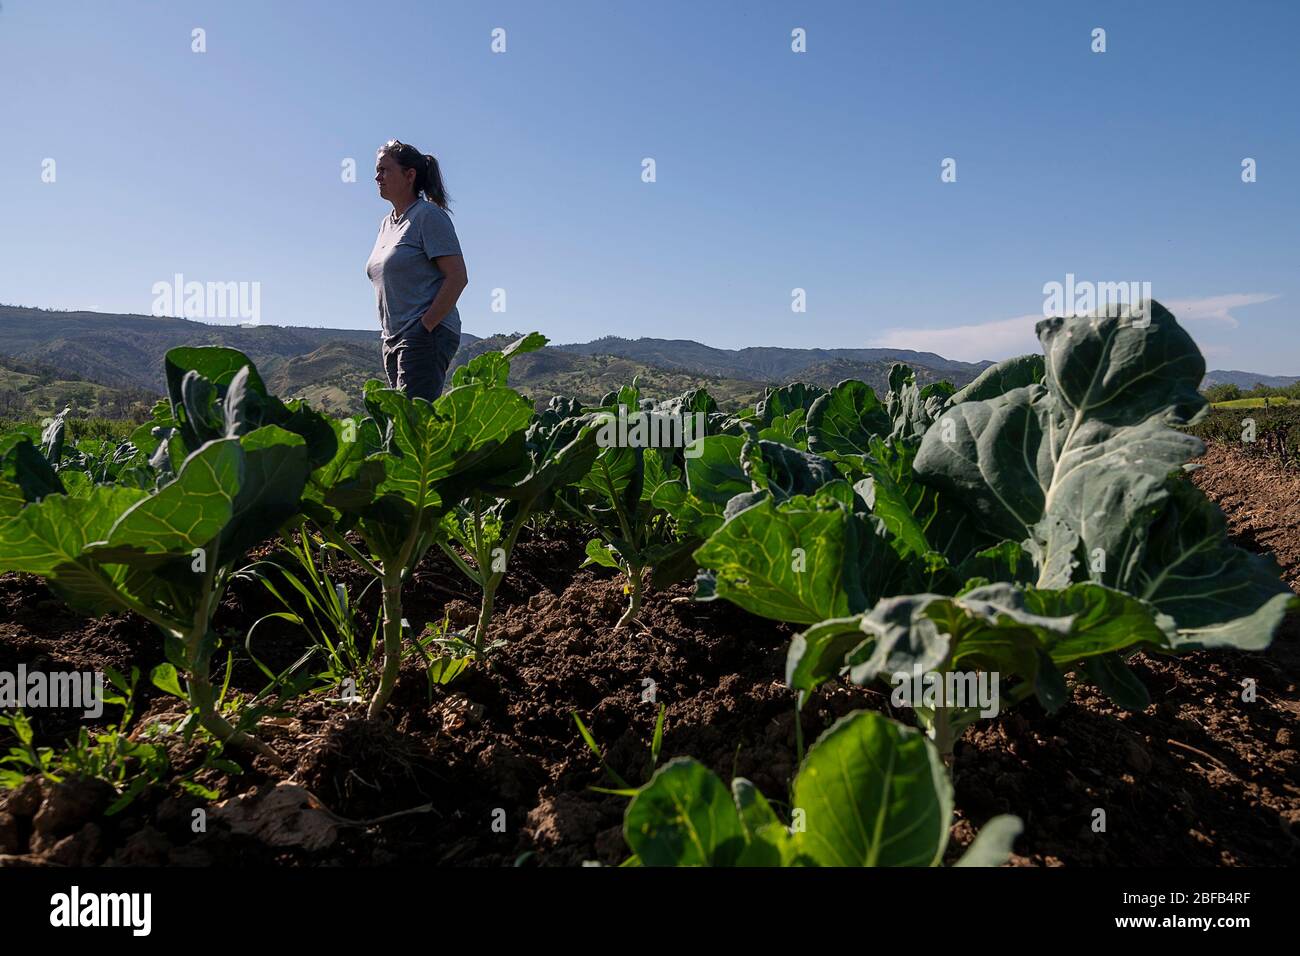 Brooks, CA, USA. 16th Apr, 2020. Organic farmer Trina Campbell of Riverdog Farm in Guida stands is one of her collard greens fields during the coronavirus pandemic on Thursday, April 16, 2020. Riverdog Farm works 450 acres of land in the Capay Valley and her company has had four-fold increase in sale of the csa (community supported agriculture) boxes of fresh produce as her restaurants sales have diminished. Credit: Paul Kitagaki Jr./ZUMA Wire/Alamy Live News Stock Photo